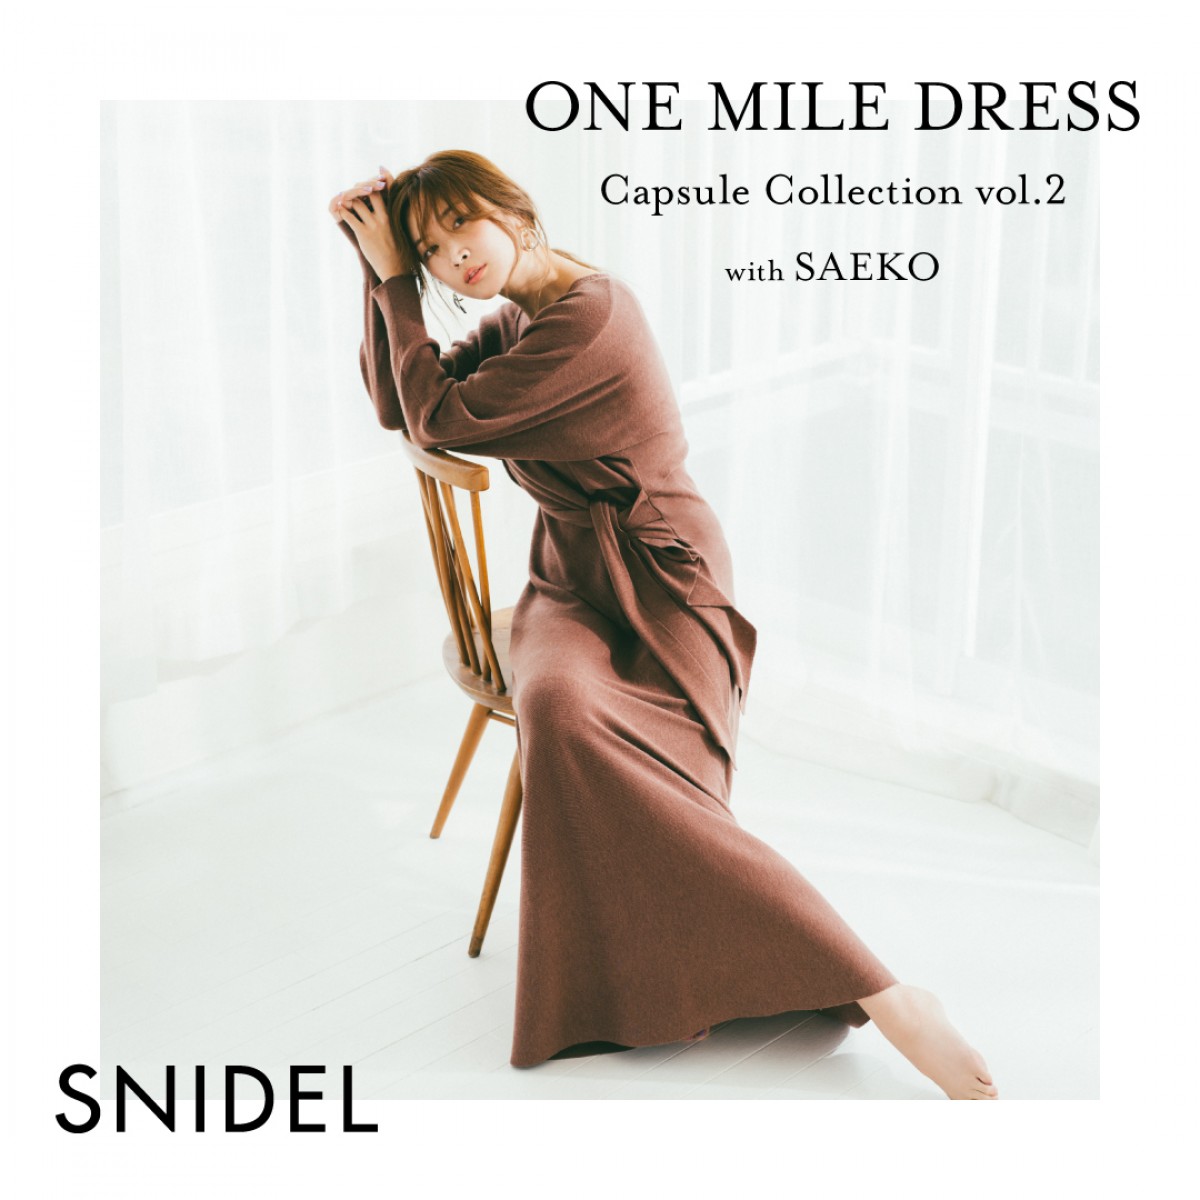 「ONE MILE DRESS Capsule Collection with Saeko」